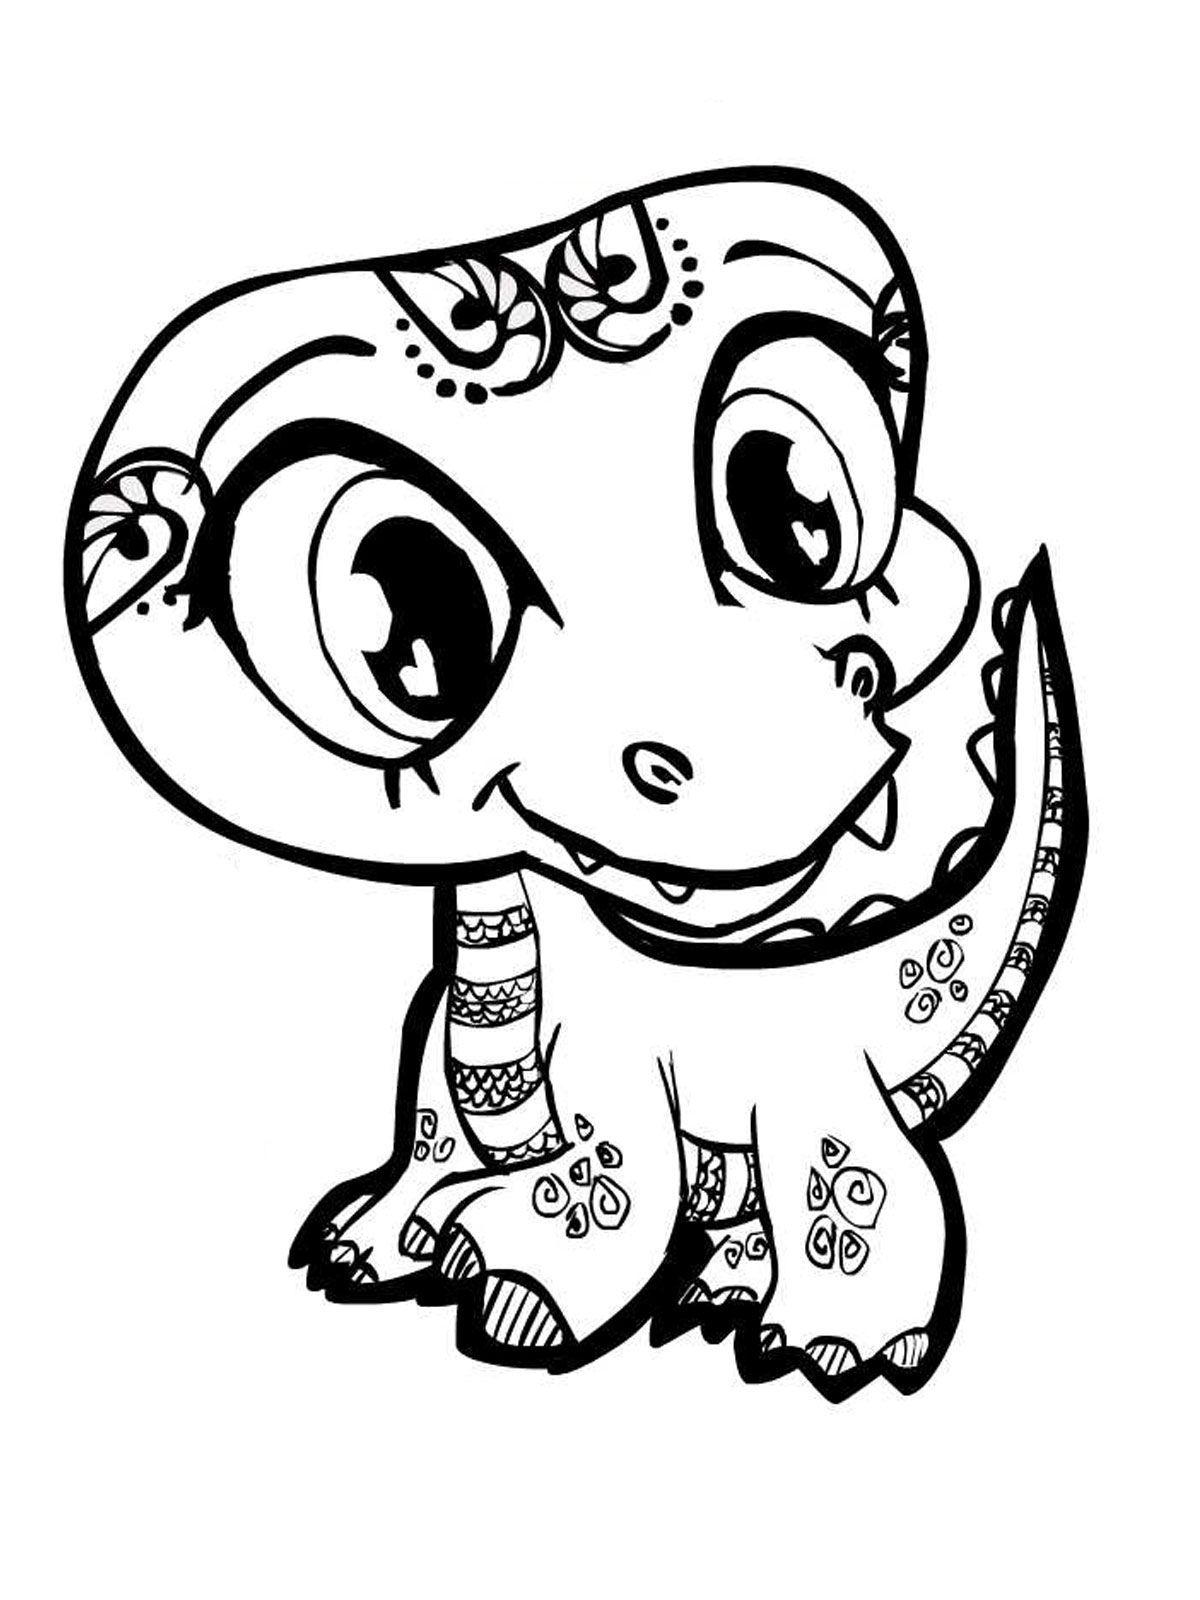 Cute animal coloring pages for girls | veupropia.org